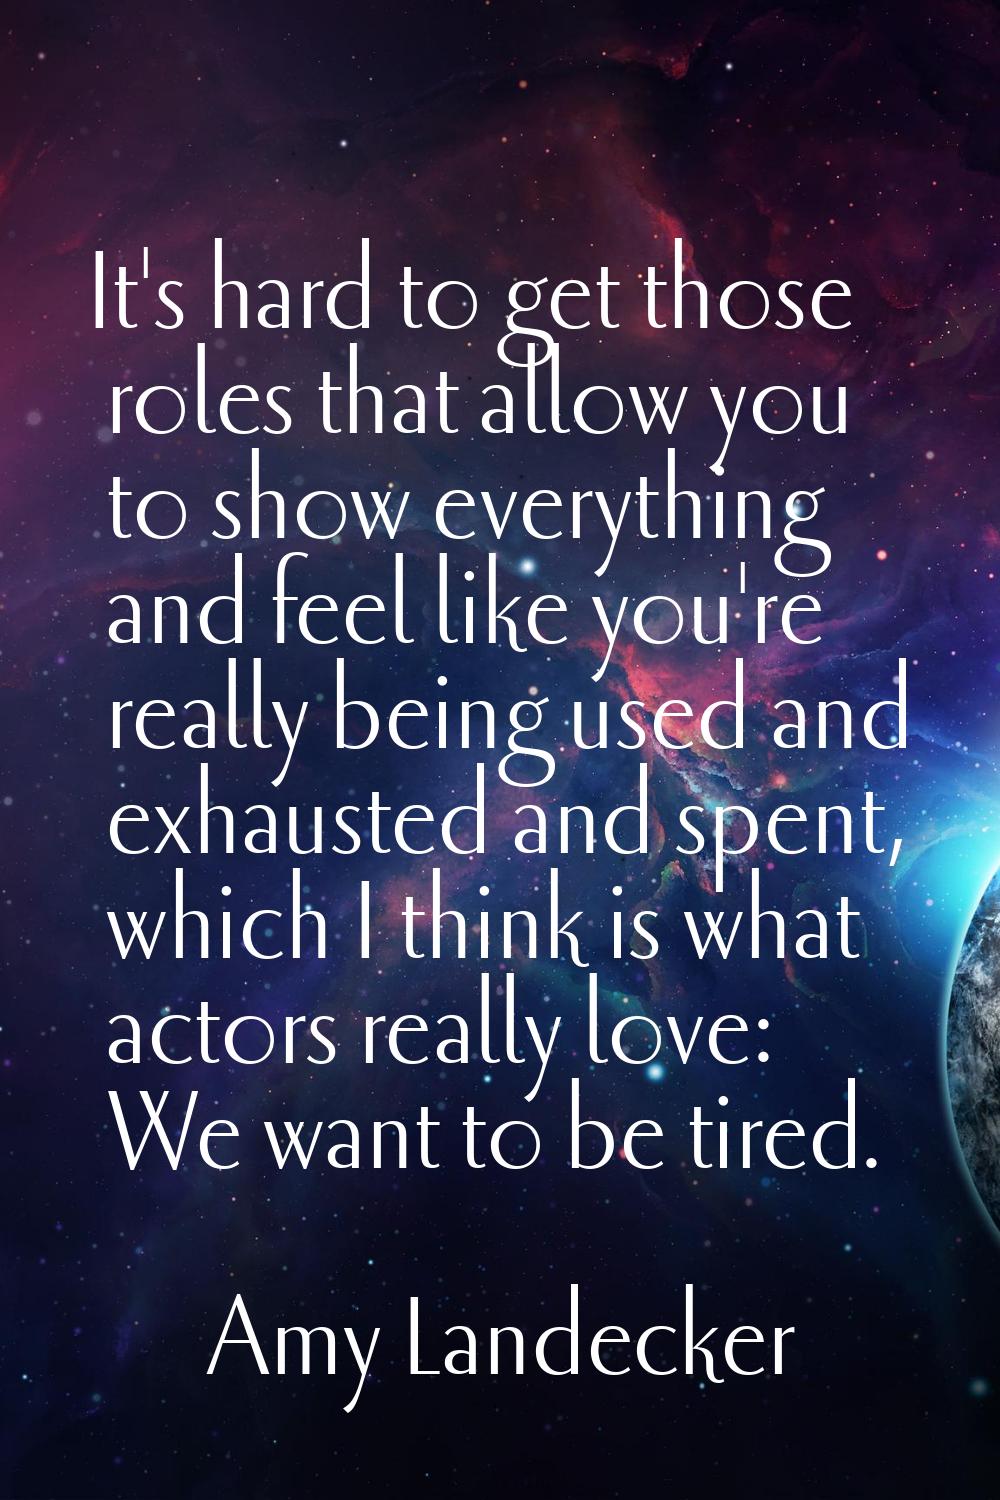 It's hard to get those roles that allow you to show everything and feel like you're really being us